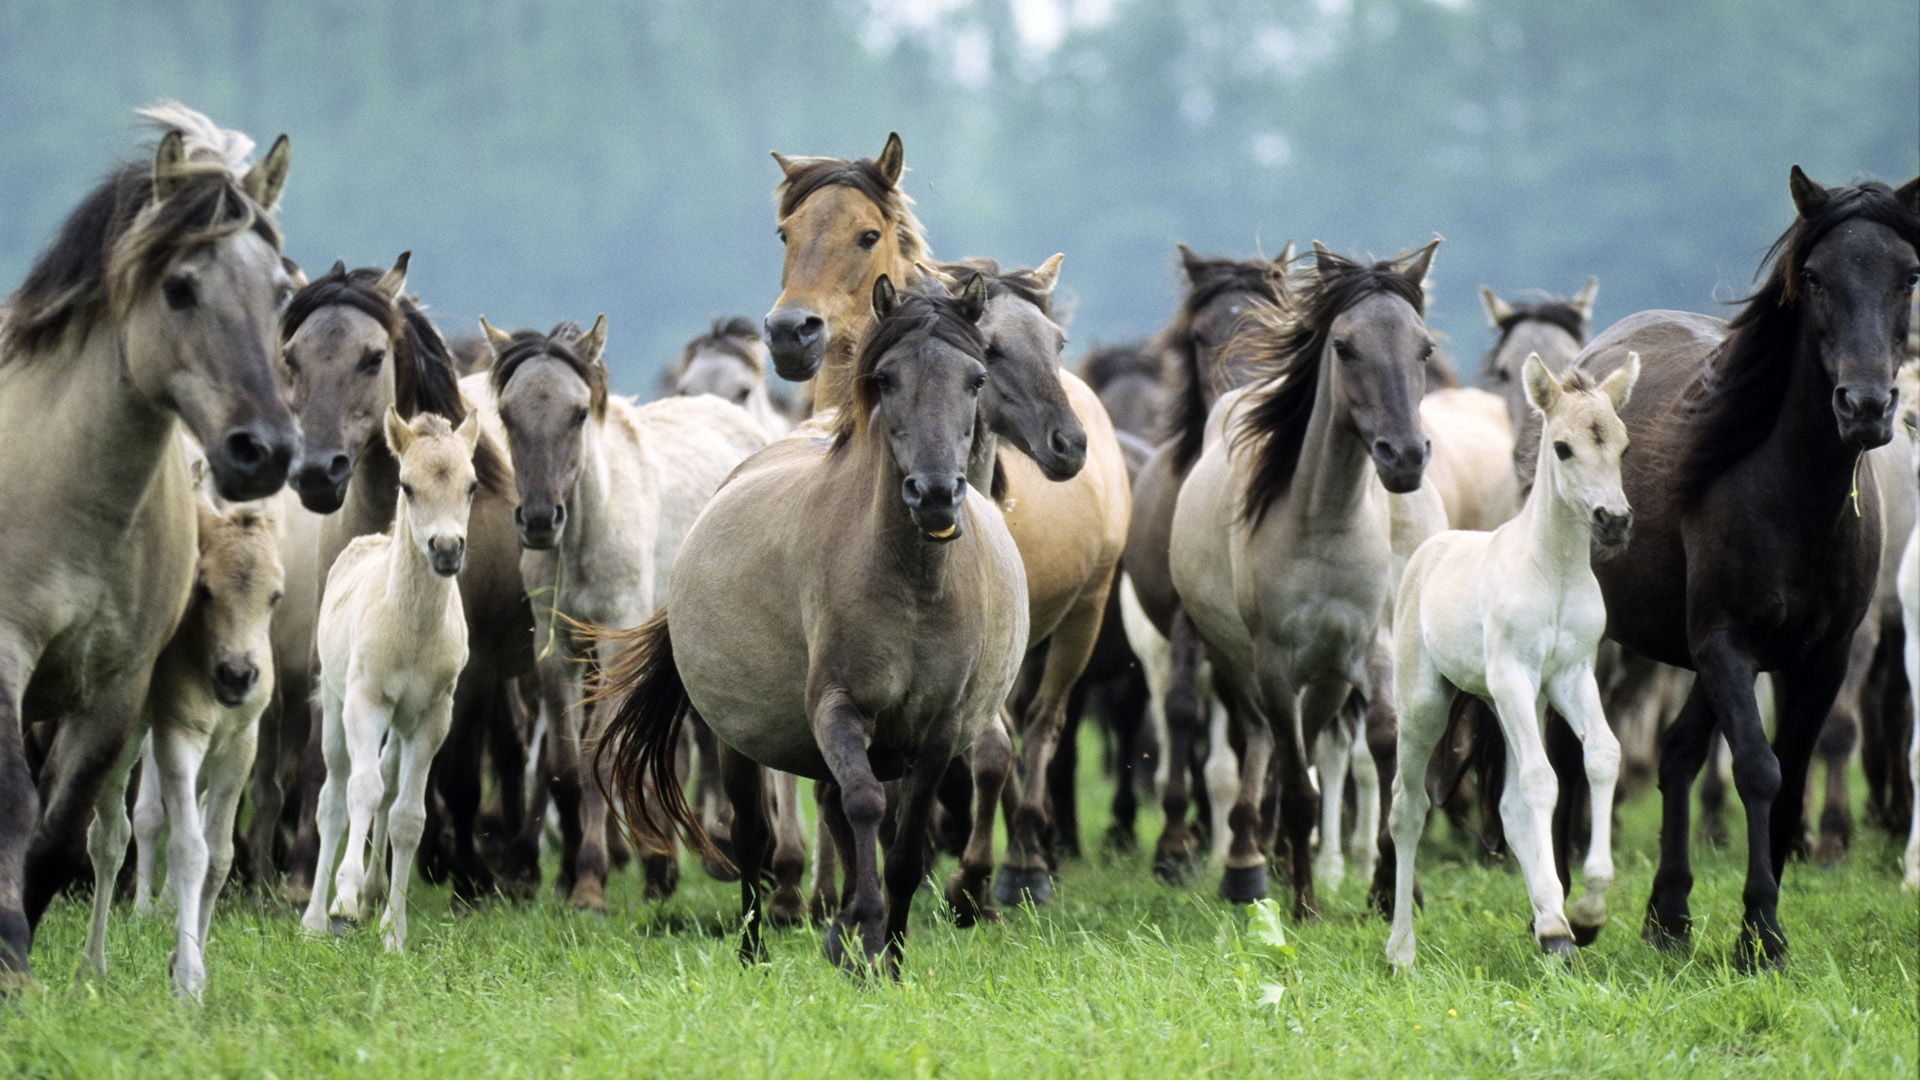 Wild Animal Pictures Download - Big Group Of Horses - HD Wallpaper 